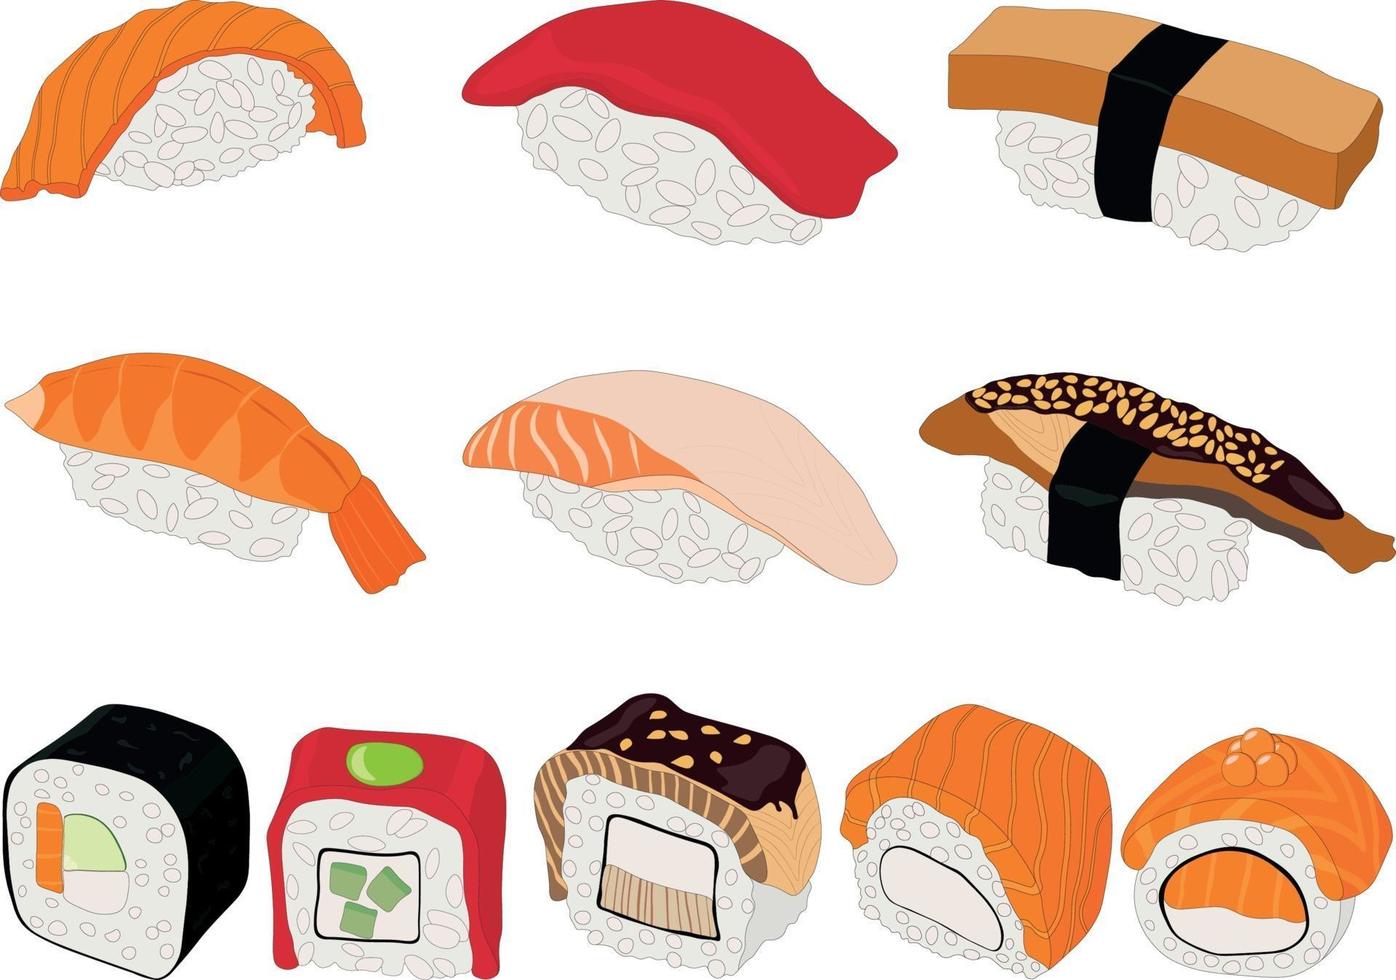 Sushi and roll different types and ingredients vector illustration set